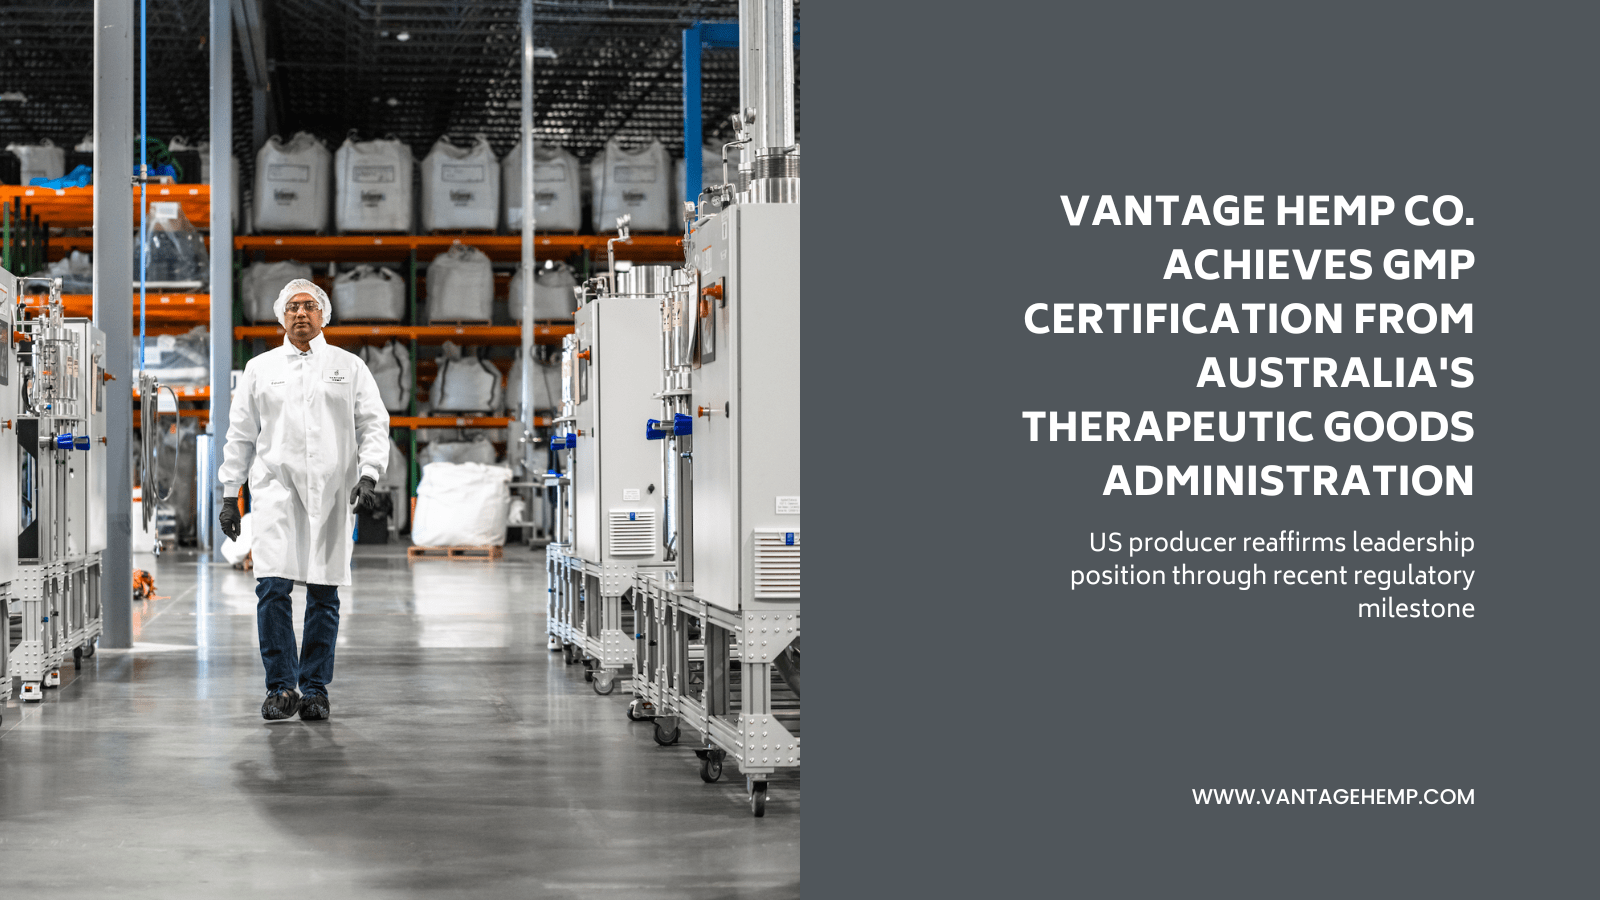 Vantage Hemp Co. Achieves GMP Certification from Australia’s Therapeutic Goods Administration 